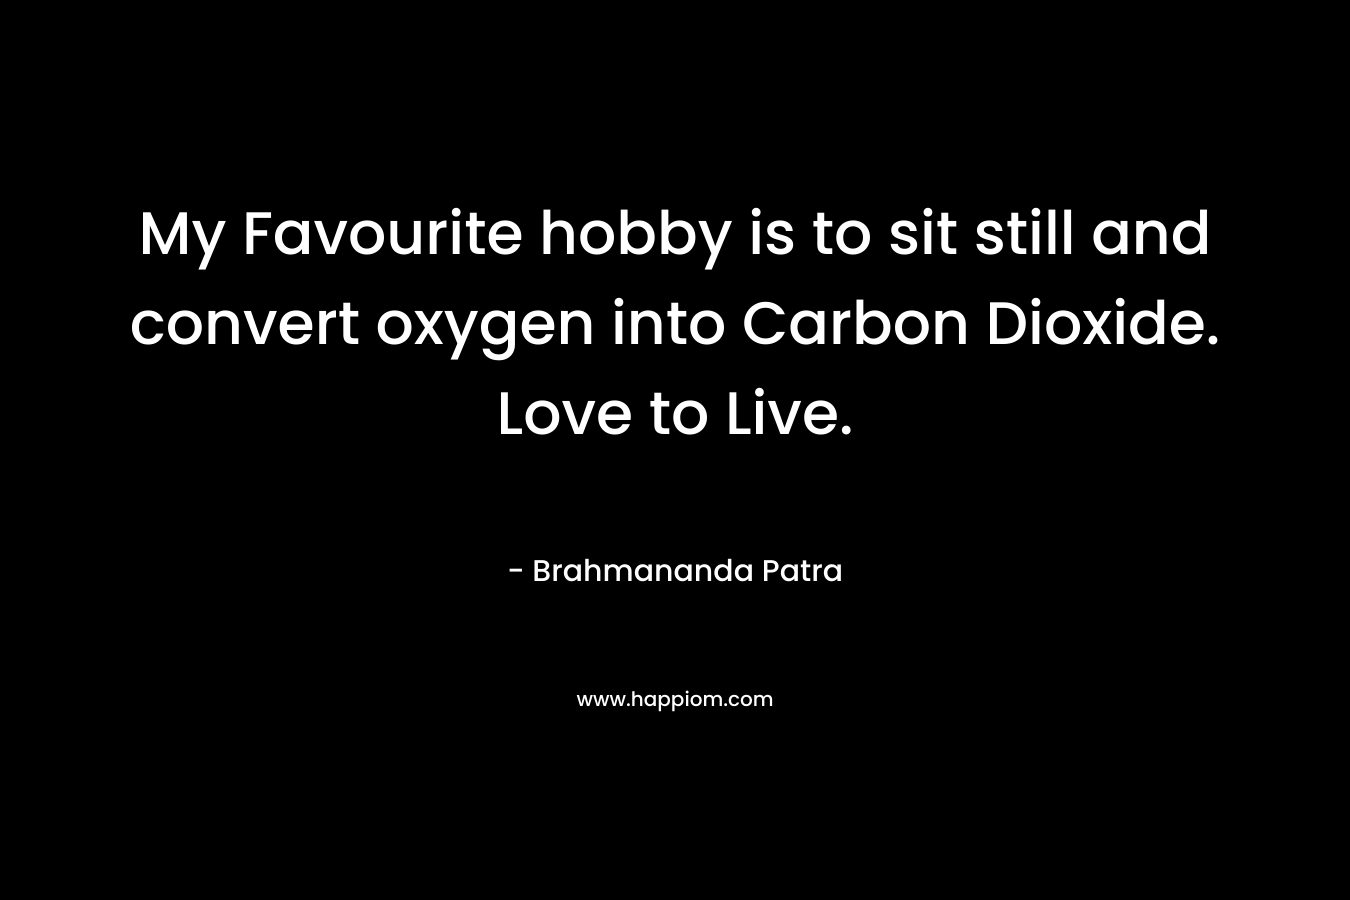 My Favourite hobby is to sit still and convert oxygen into Carbon Dioxide. Love to Live.